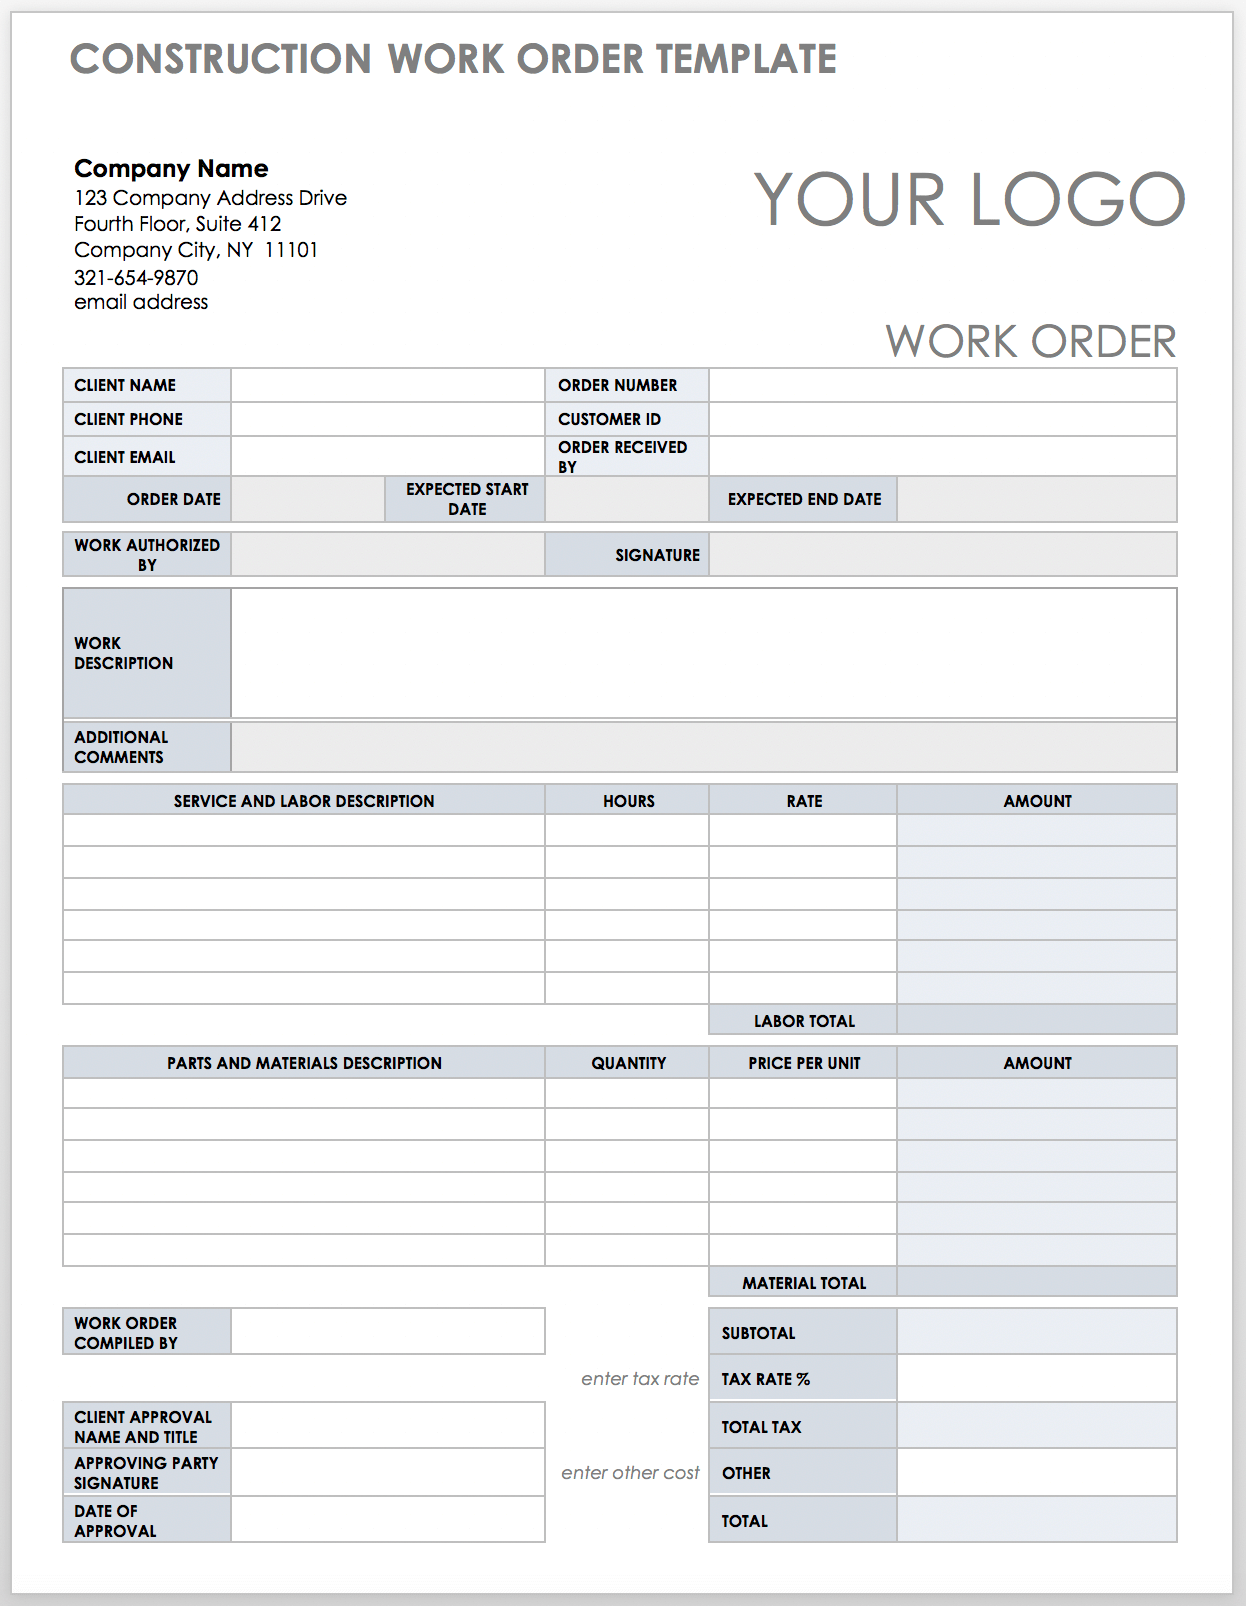 Free Construction Work Order Templates & Forms  Smartsheet Throughout Sample Job Cards Templates